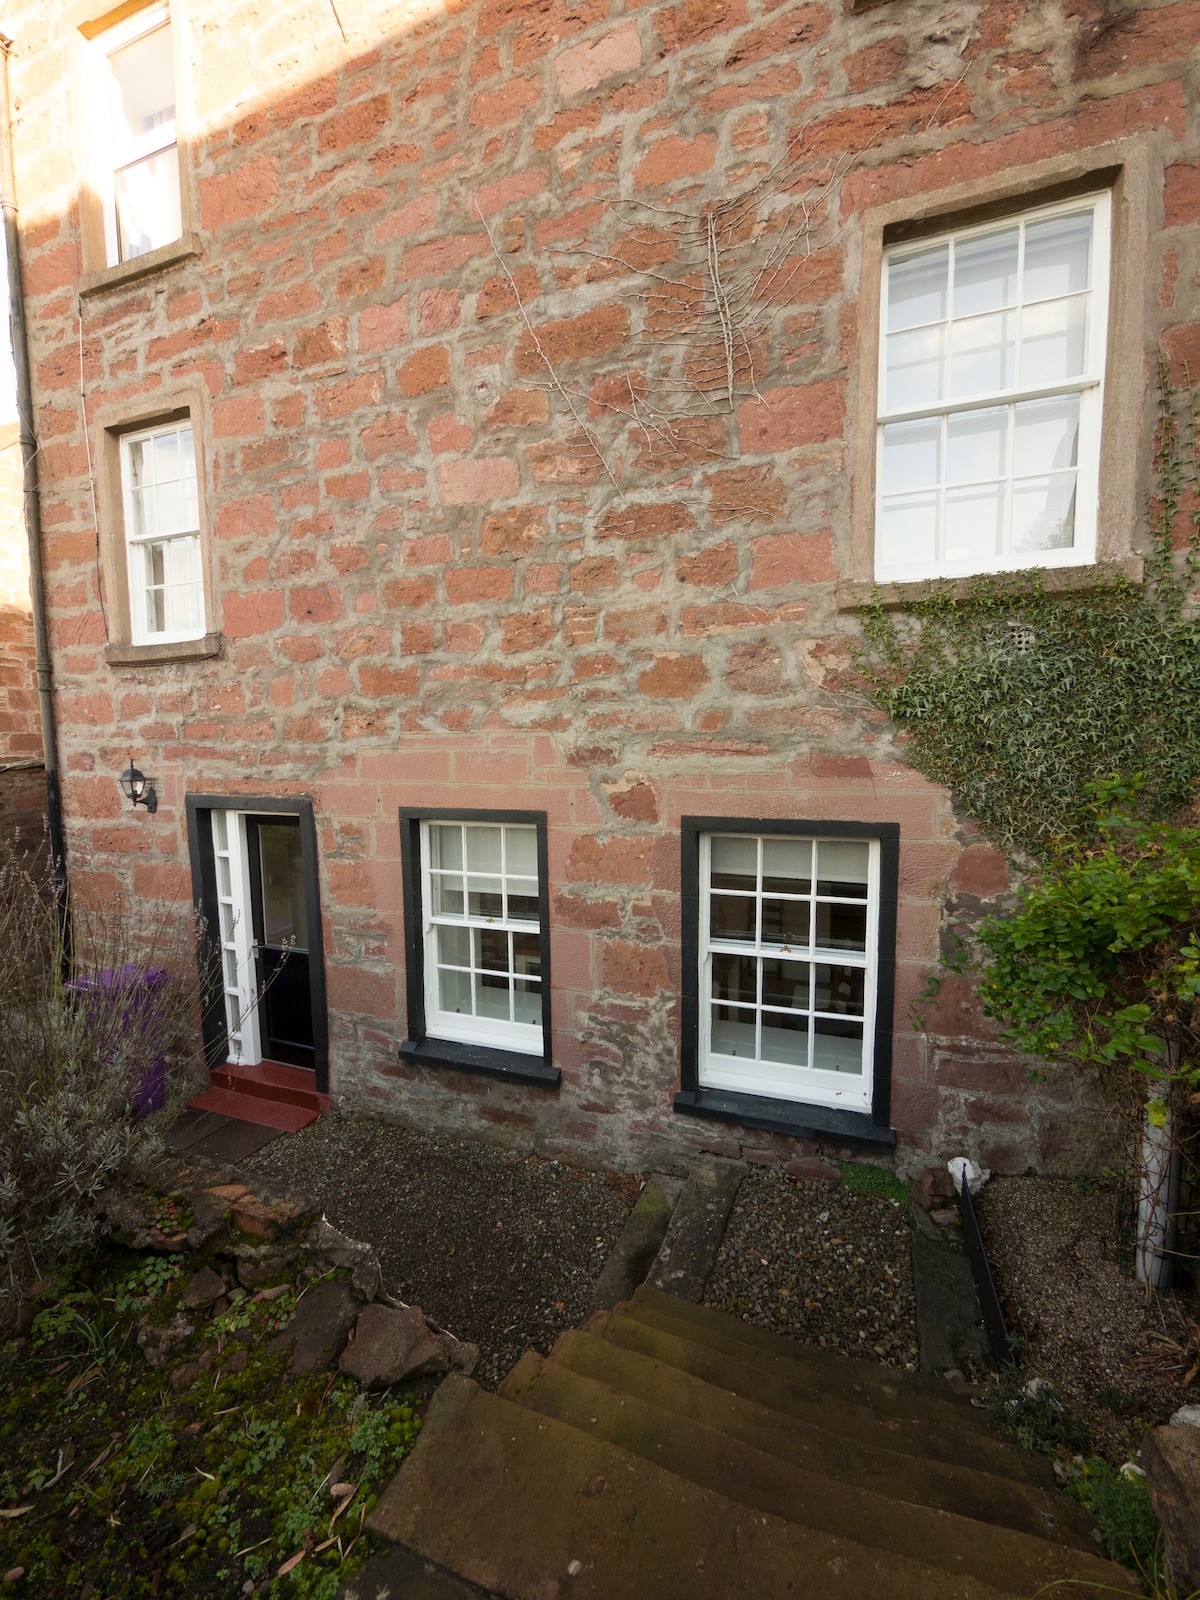 The Gallery Flat, 4 Tannage Brae.